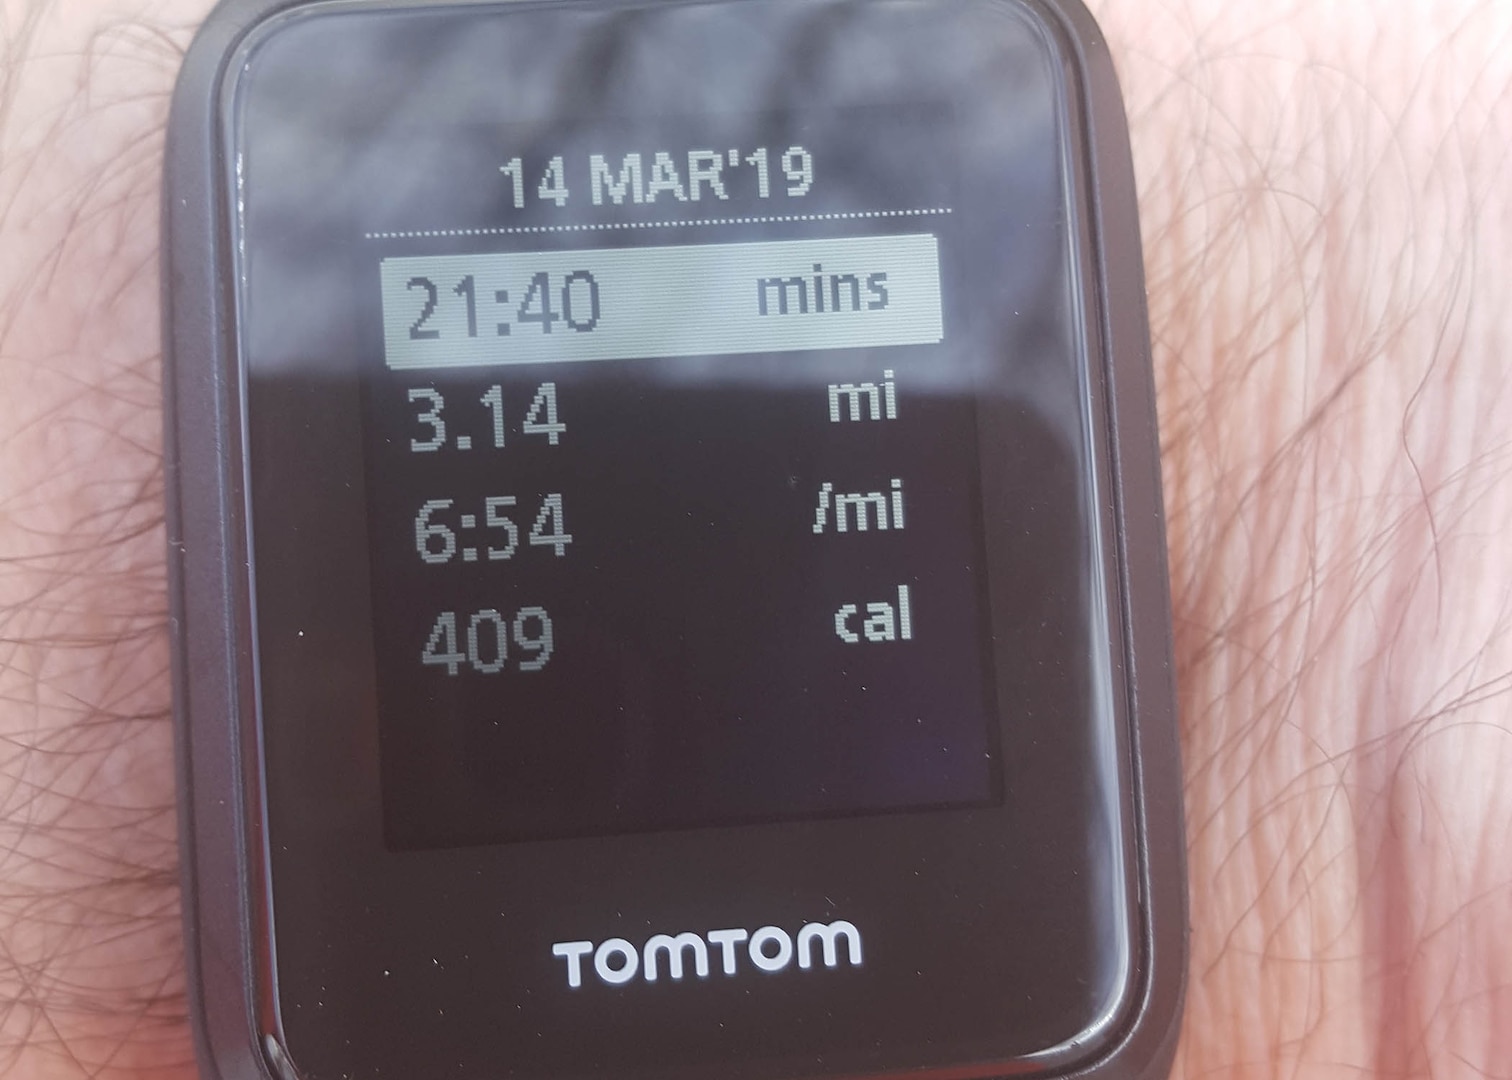 Tech. Sgt. James Vandenberg uses his fitness watch to share his time for the 3.14 mile run.